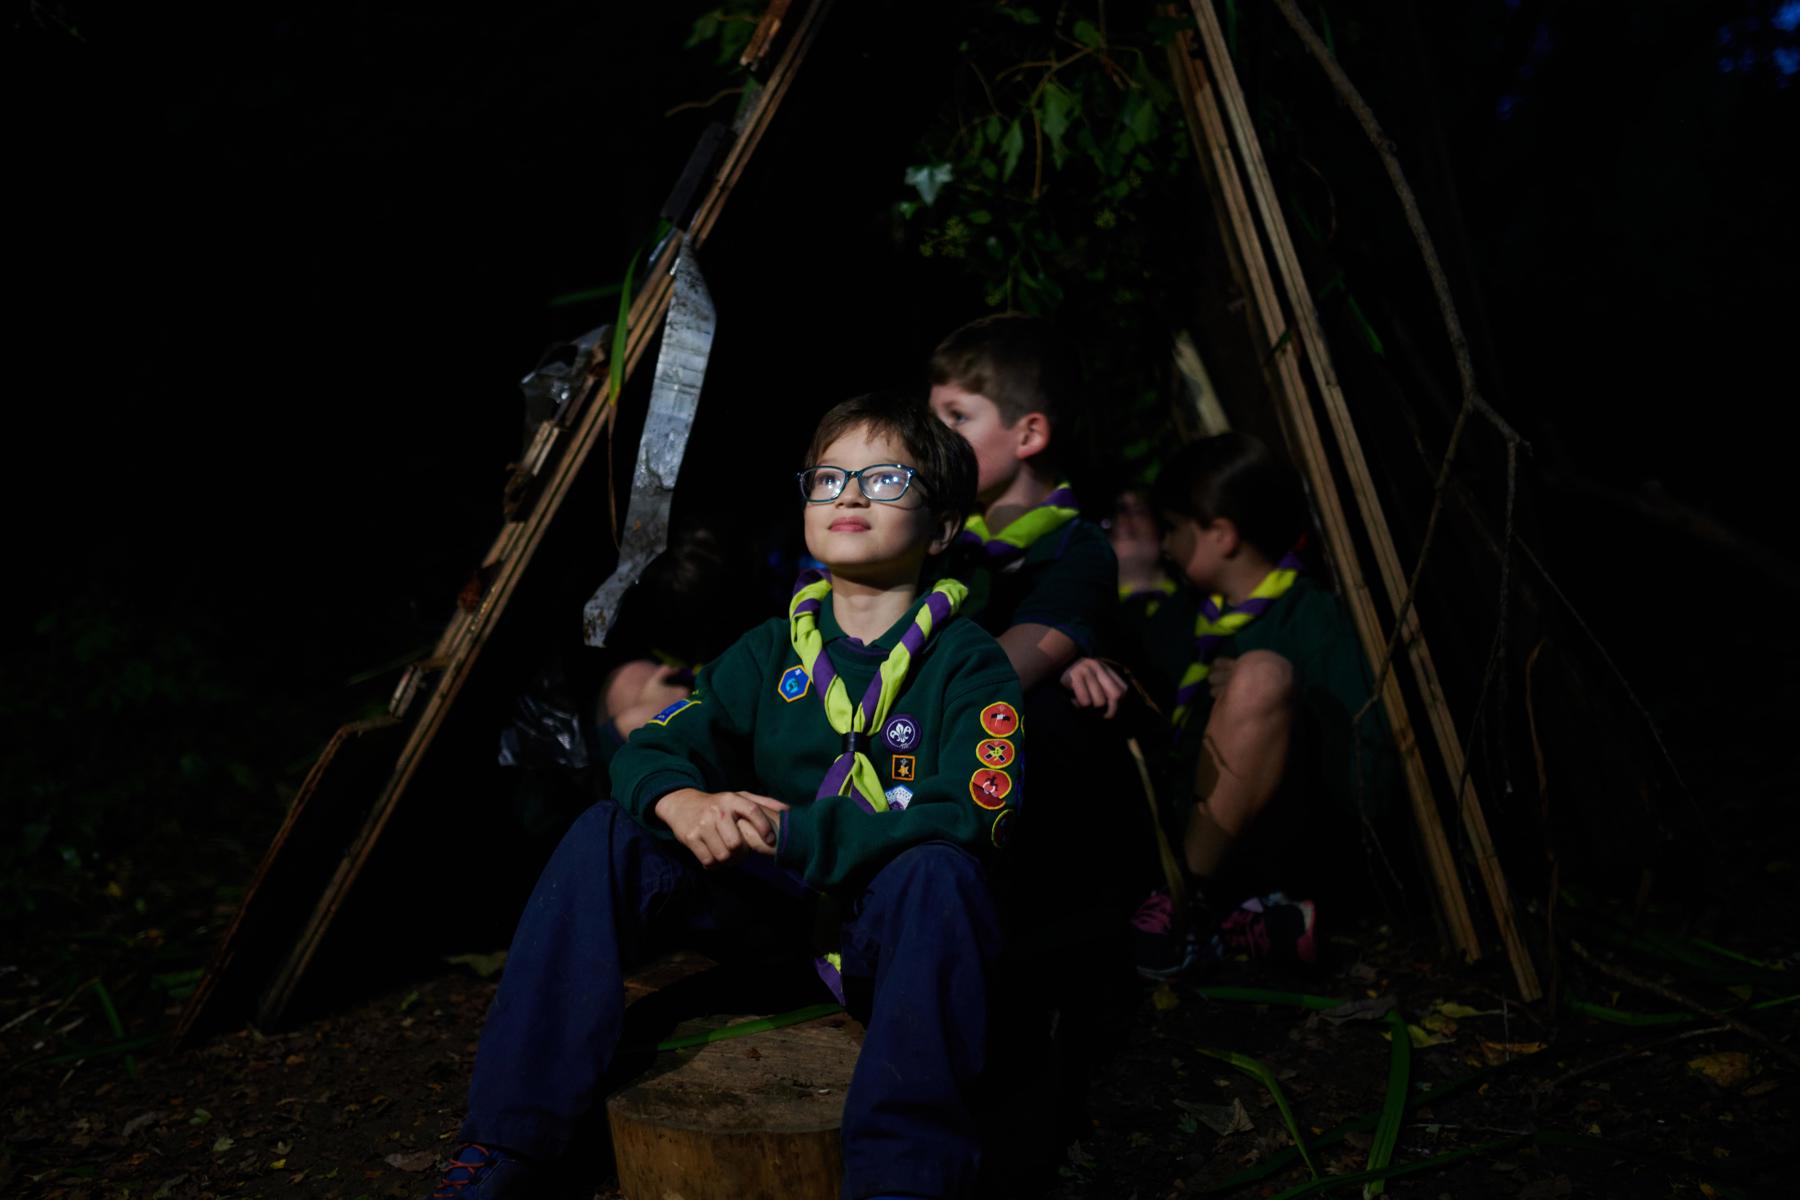 A boy in Cub uniform is seated outside a tent at night.